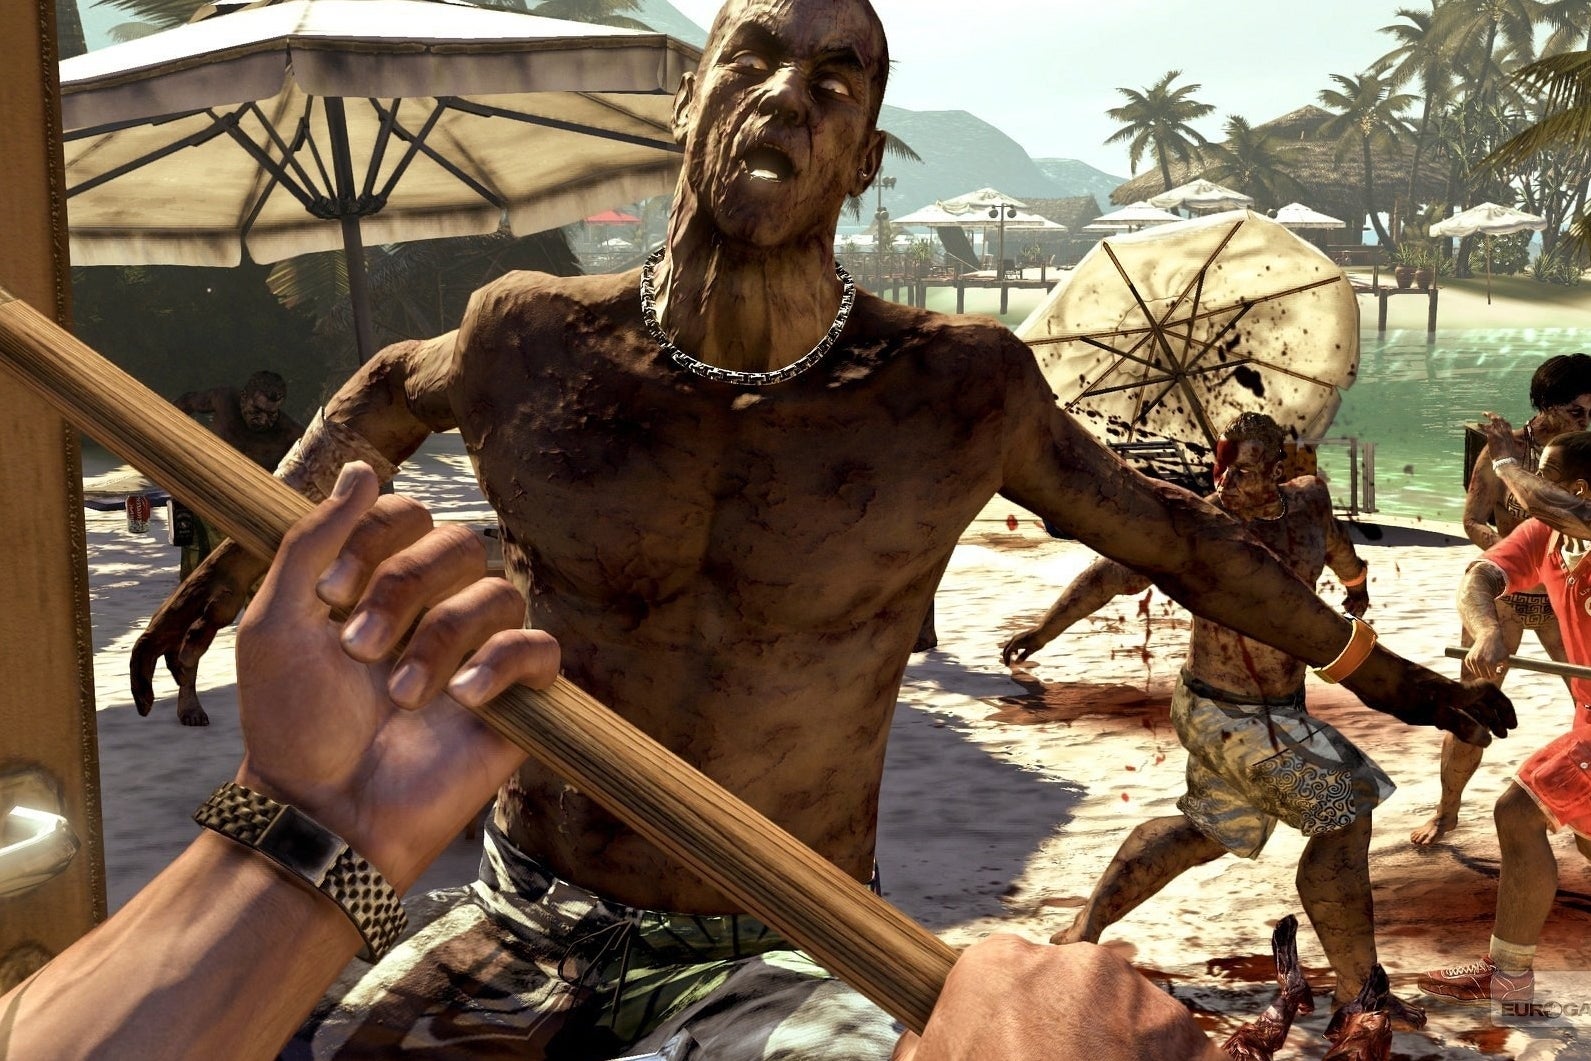 Image for Dead Island's whopping five million sales proves new IP can succeed at the end of a console lifecycle, publisher says